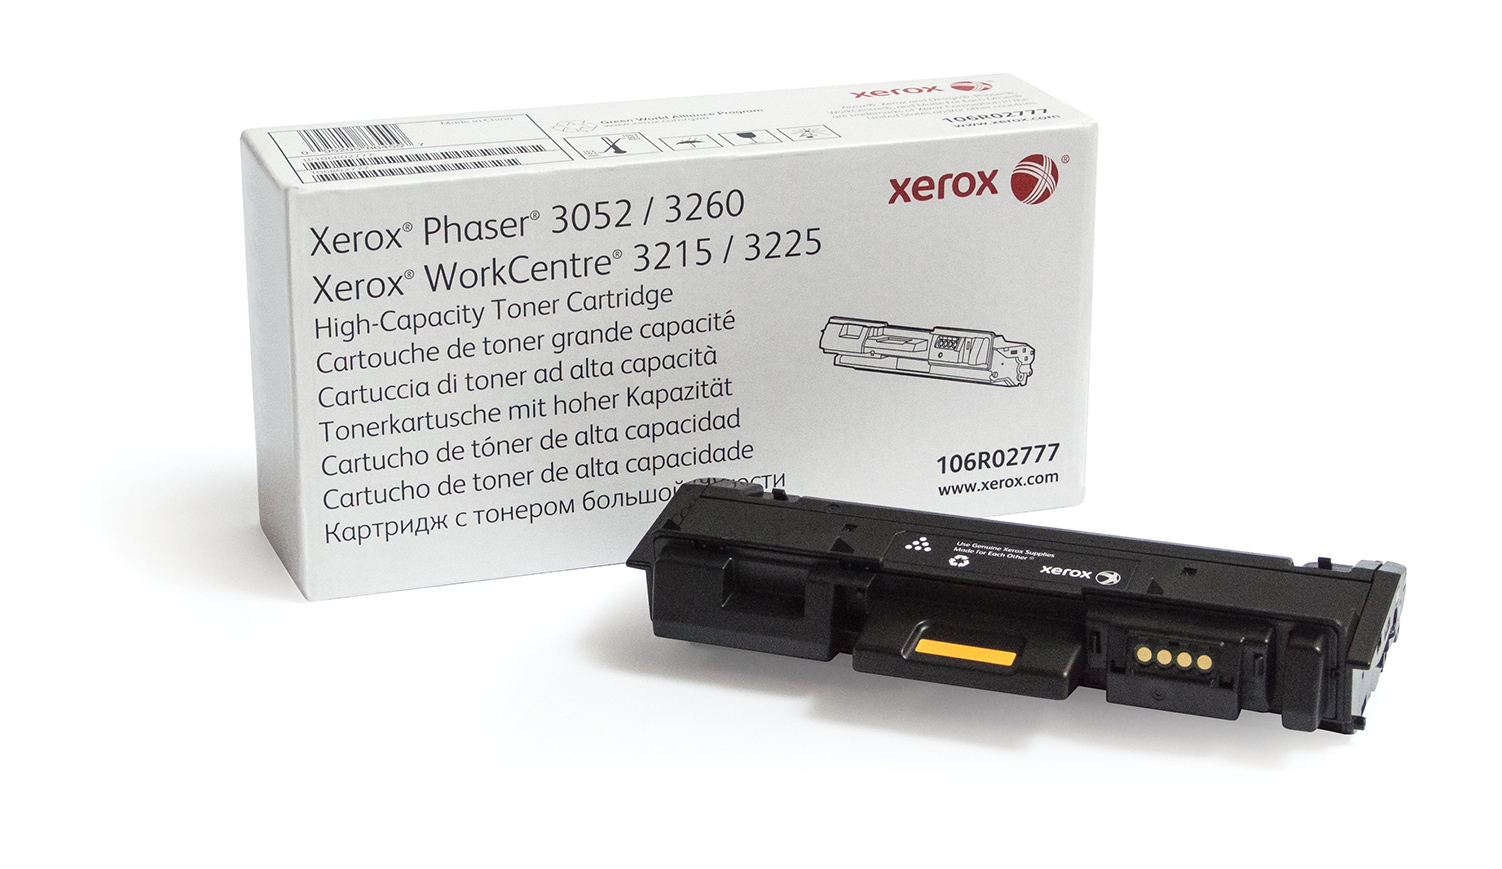 Xer106r02777   Xerox Wc3215/3225 High Black   Toner 3,000 Pages                                            - UF01